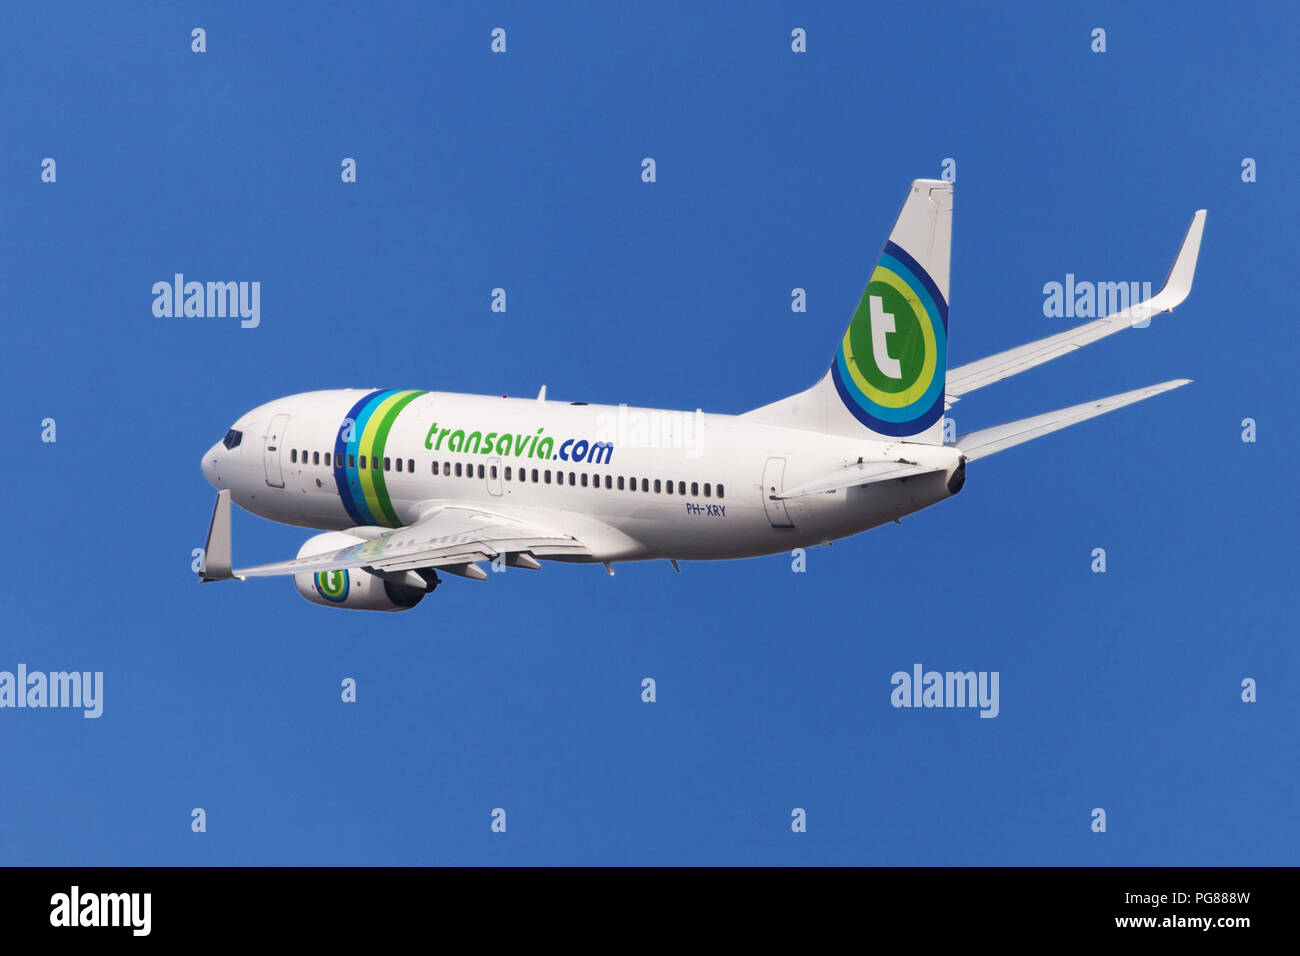 Barcelona, Spain - August 21, 2018: Transavia Boeing 737-700 banking left after taking off from El Prat Airport in Barcelona, Spain. Stock Photo